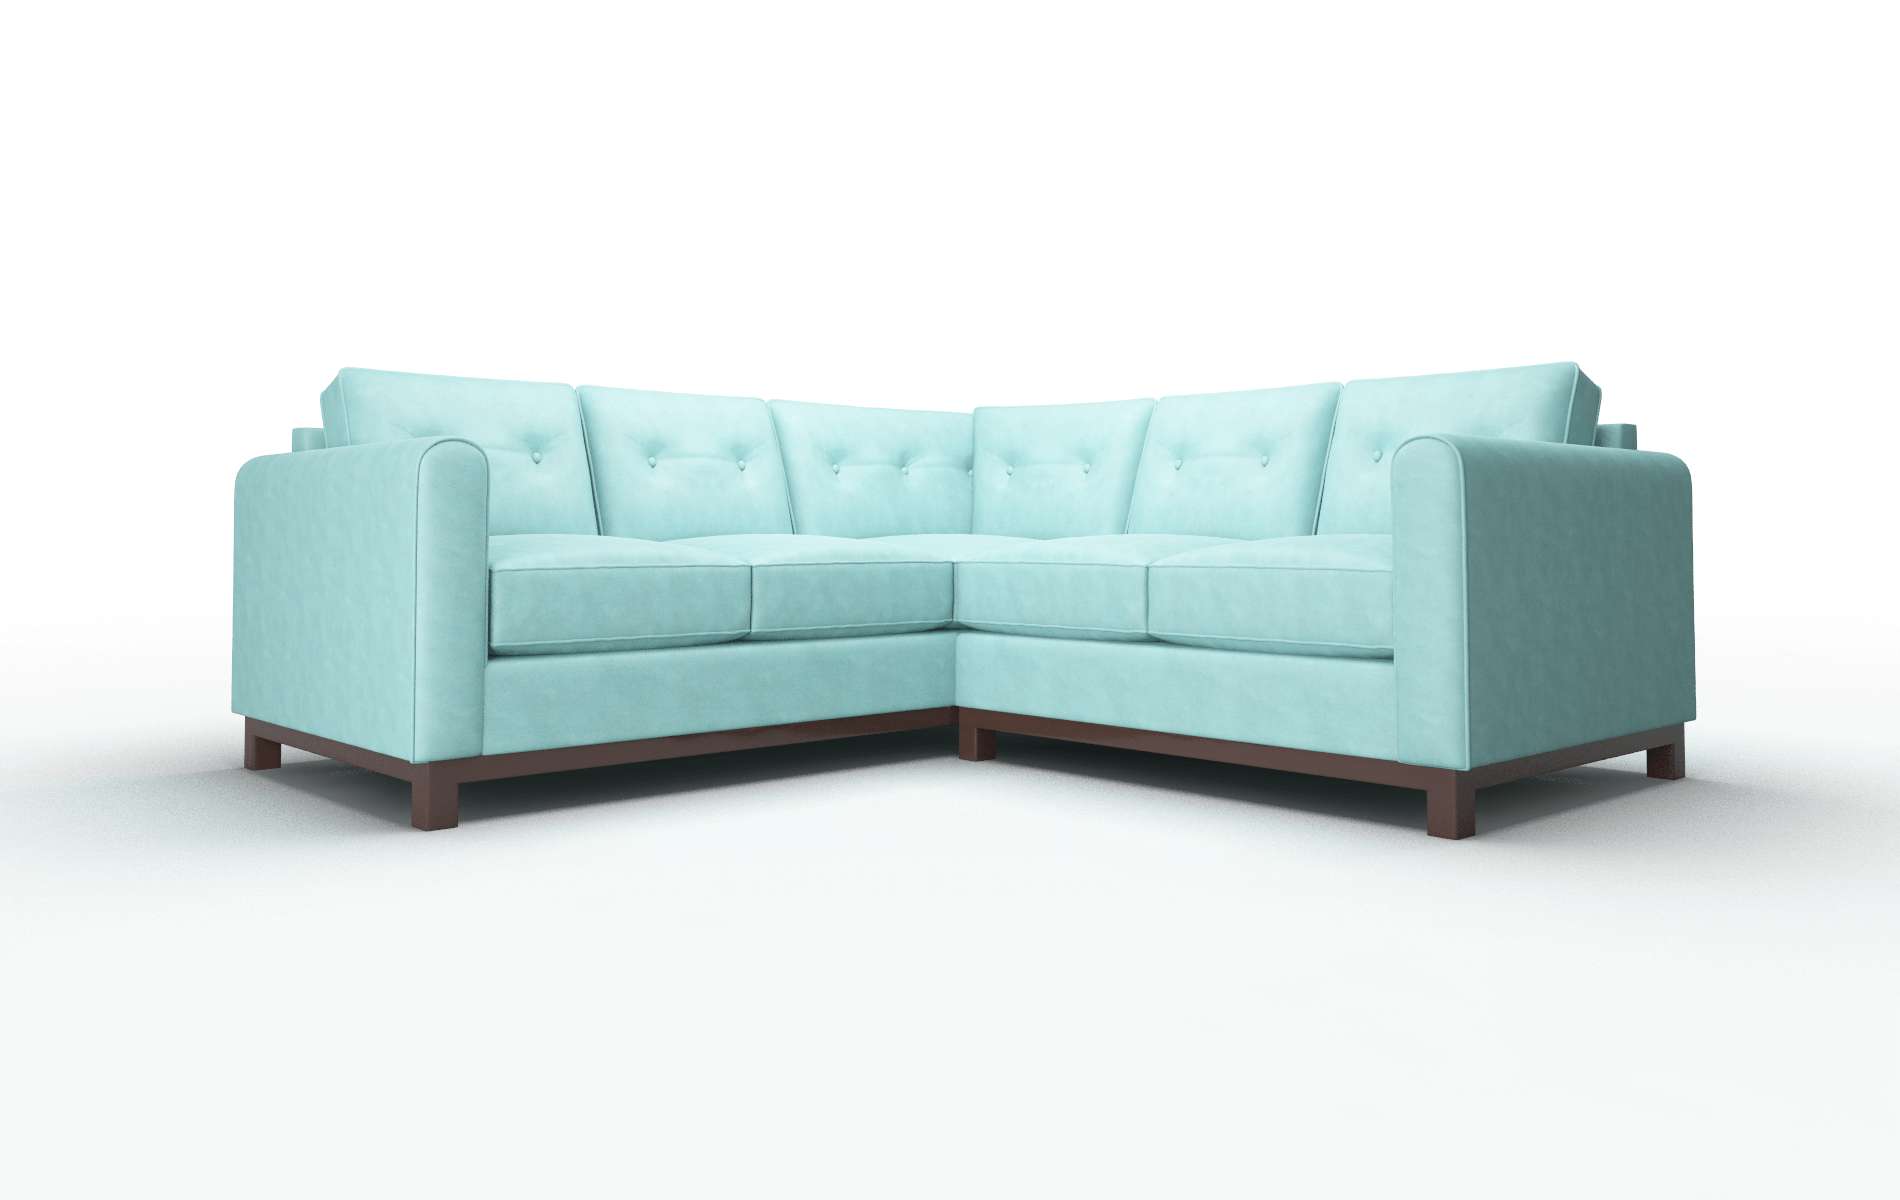 Rio Curious Turquoise Sectional espresso legs